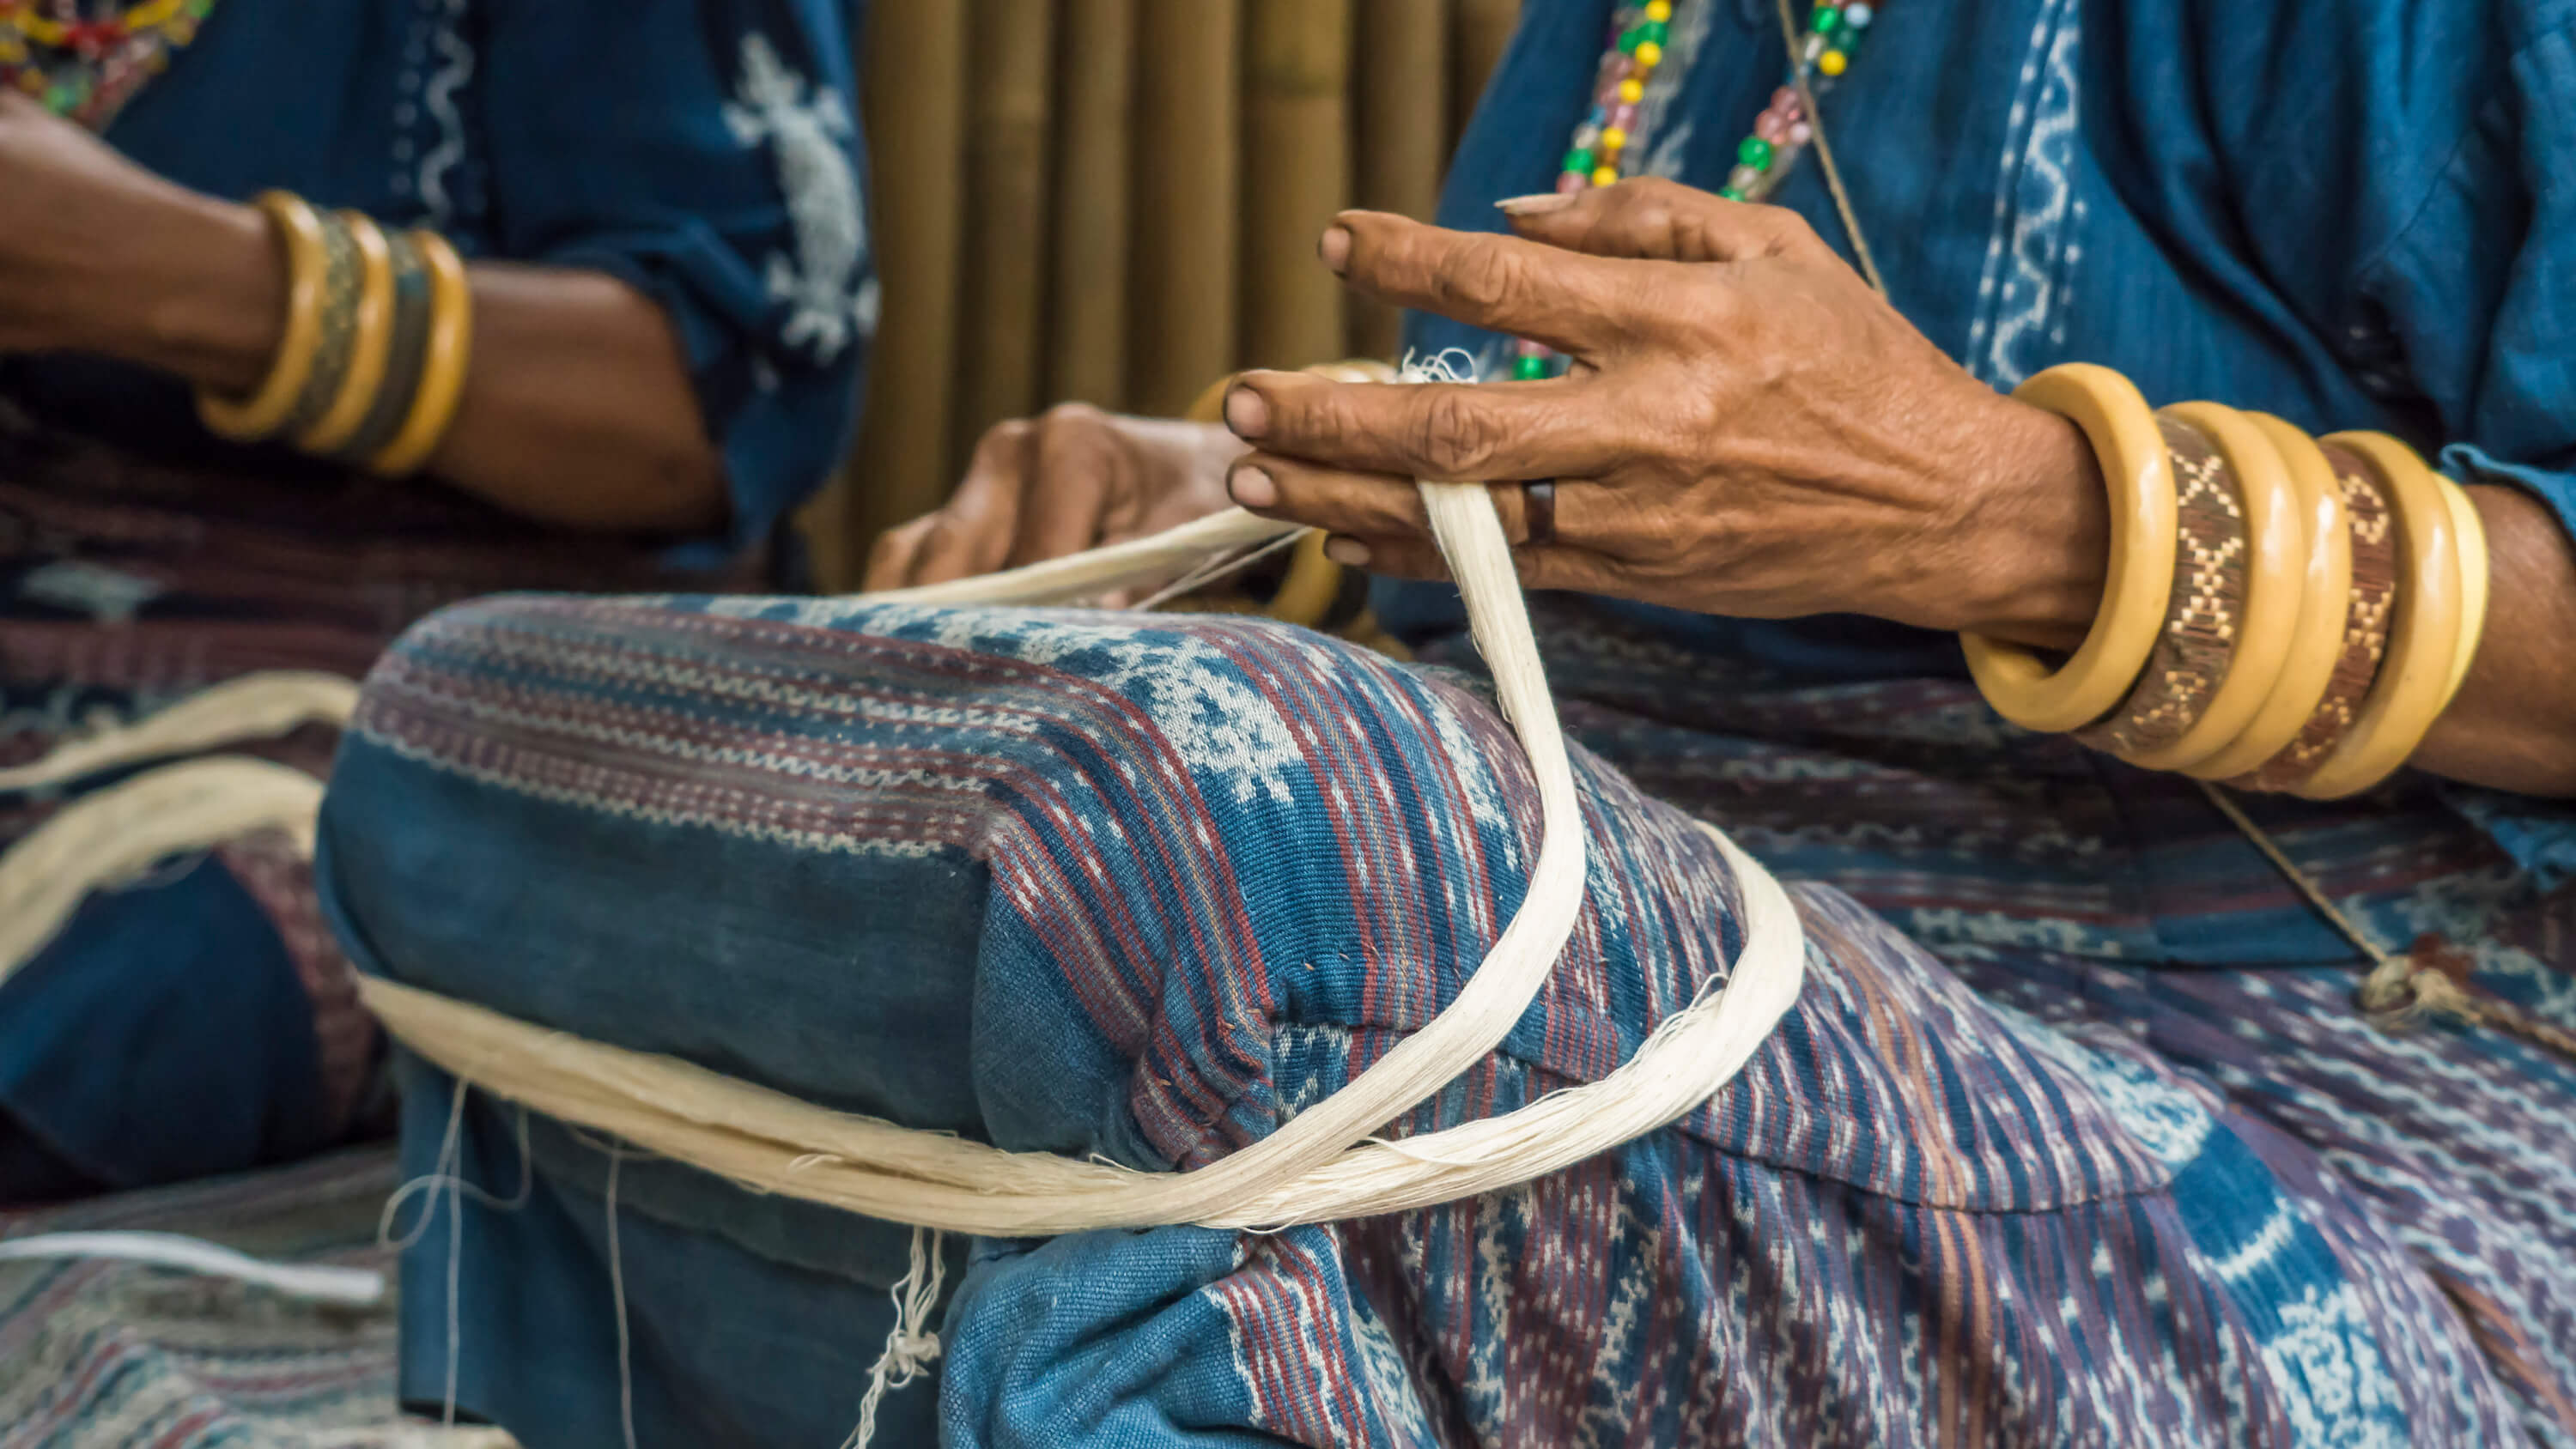 A Watubo weaver demonstrates how to ball up thread sans spinner, by rolling thread around her legs while seated. This is the first of many steps in the ikat weaving process guests get to learn about and try their hand at during the workshop. Photo by Andra Fembriarto 